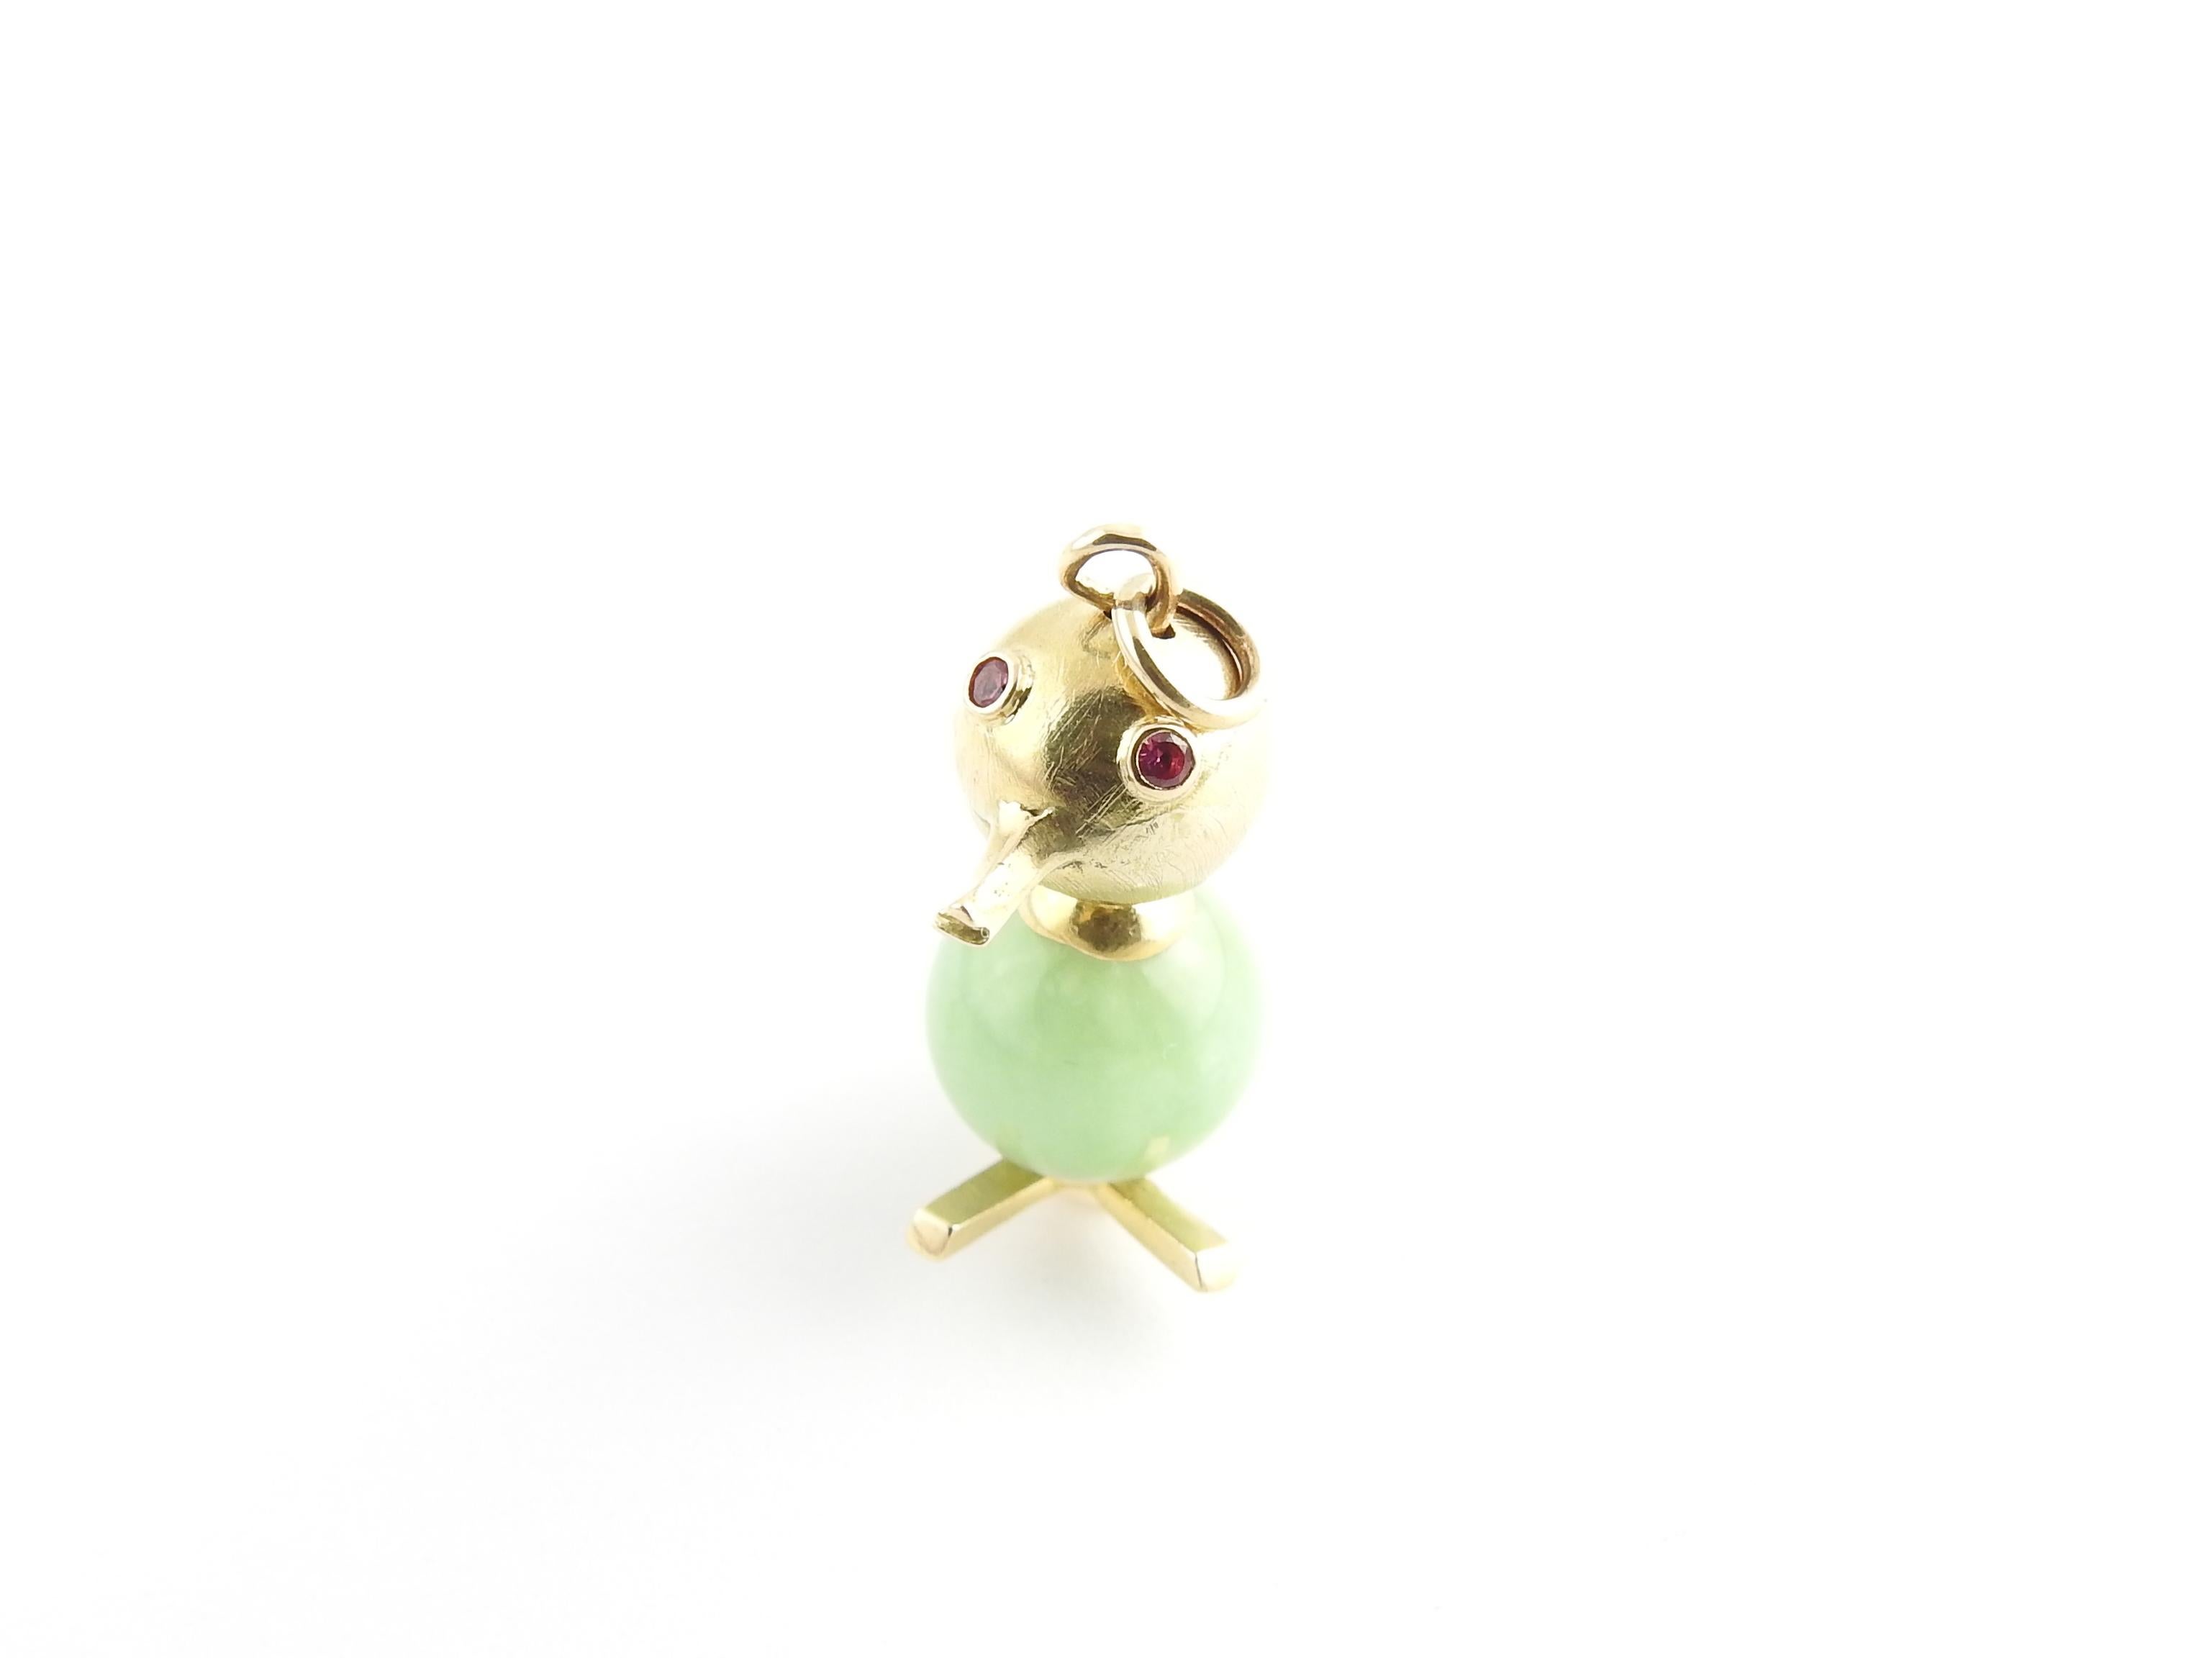 Vintage 14K Yellow Gold and Jade Duck Charm / Pendant with Red Eyes

This adorable 3D duck charm is approx. 25mm in length, 28mm with loop

Approx. 16mm wide at base

10.5mm jade stone, 2 mm ruby eyes

2.9 dwt / 4.6 g

Very good preowned